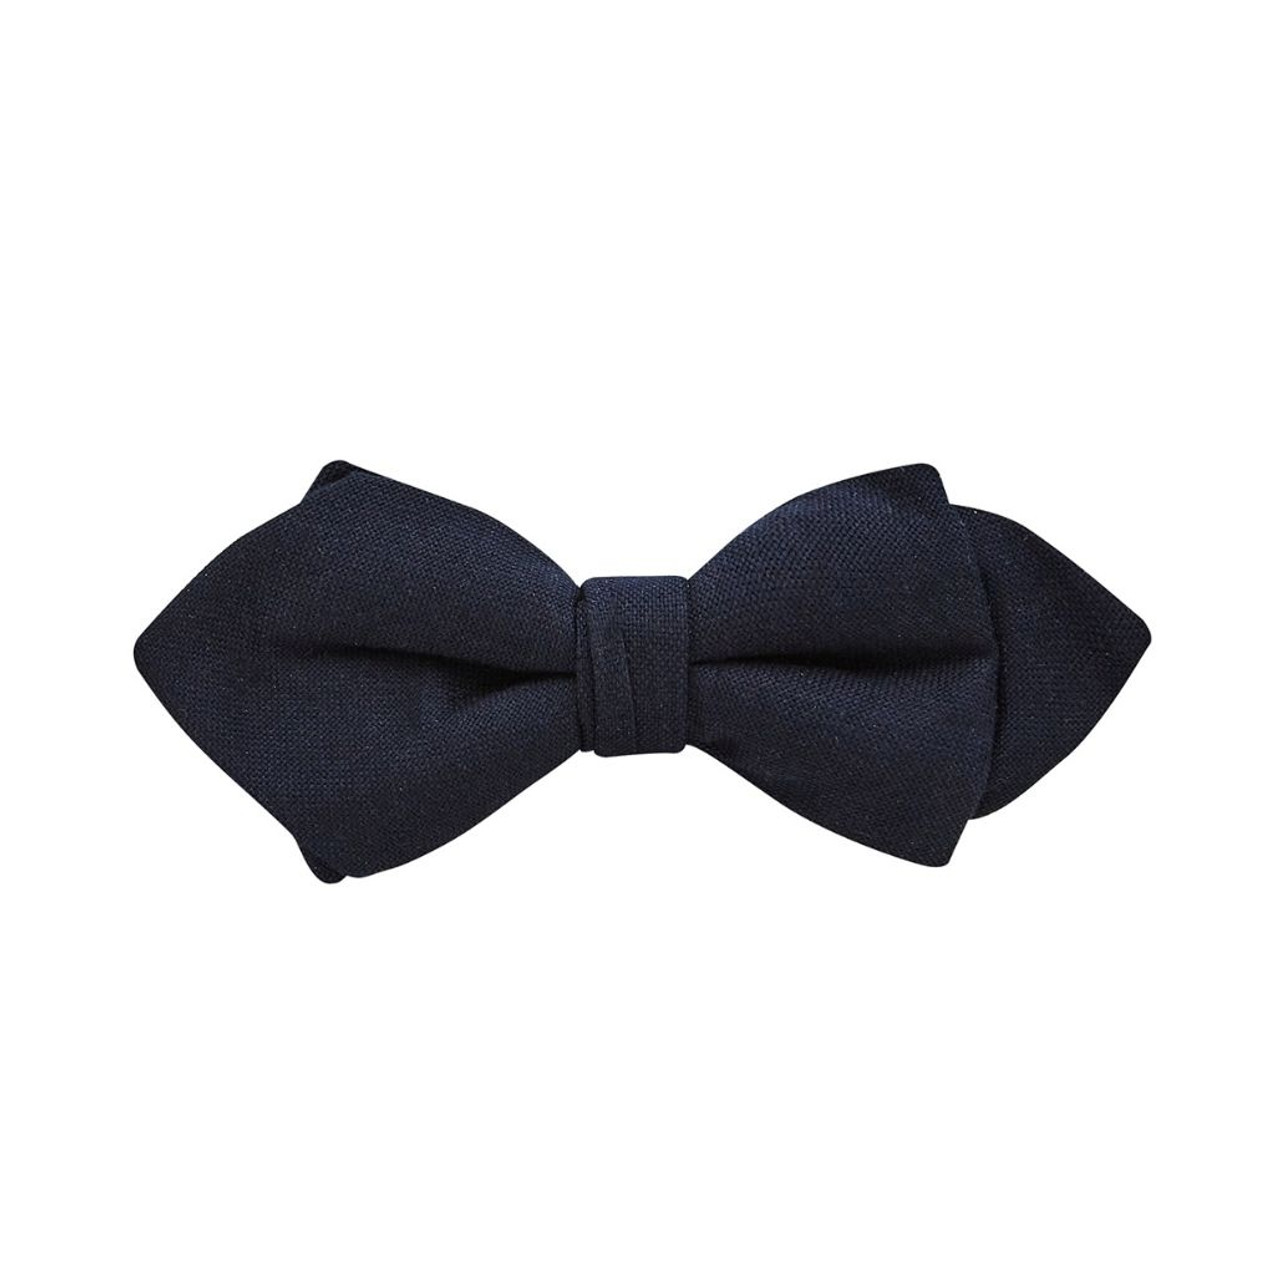 BOW TIE + POCKET SQUARE SET. BDT Plain. Navy. Supplied with matching pocket square.